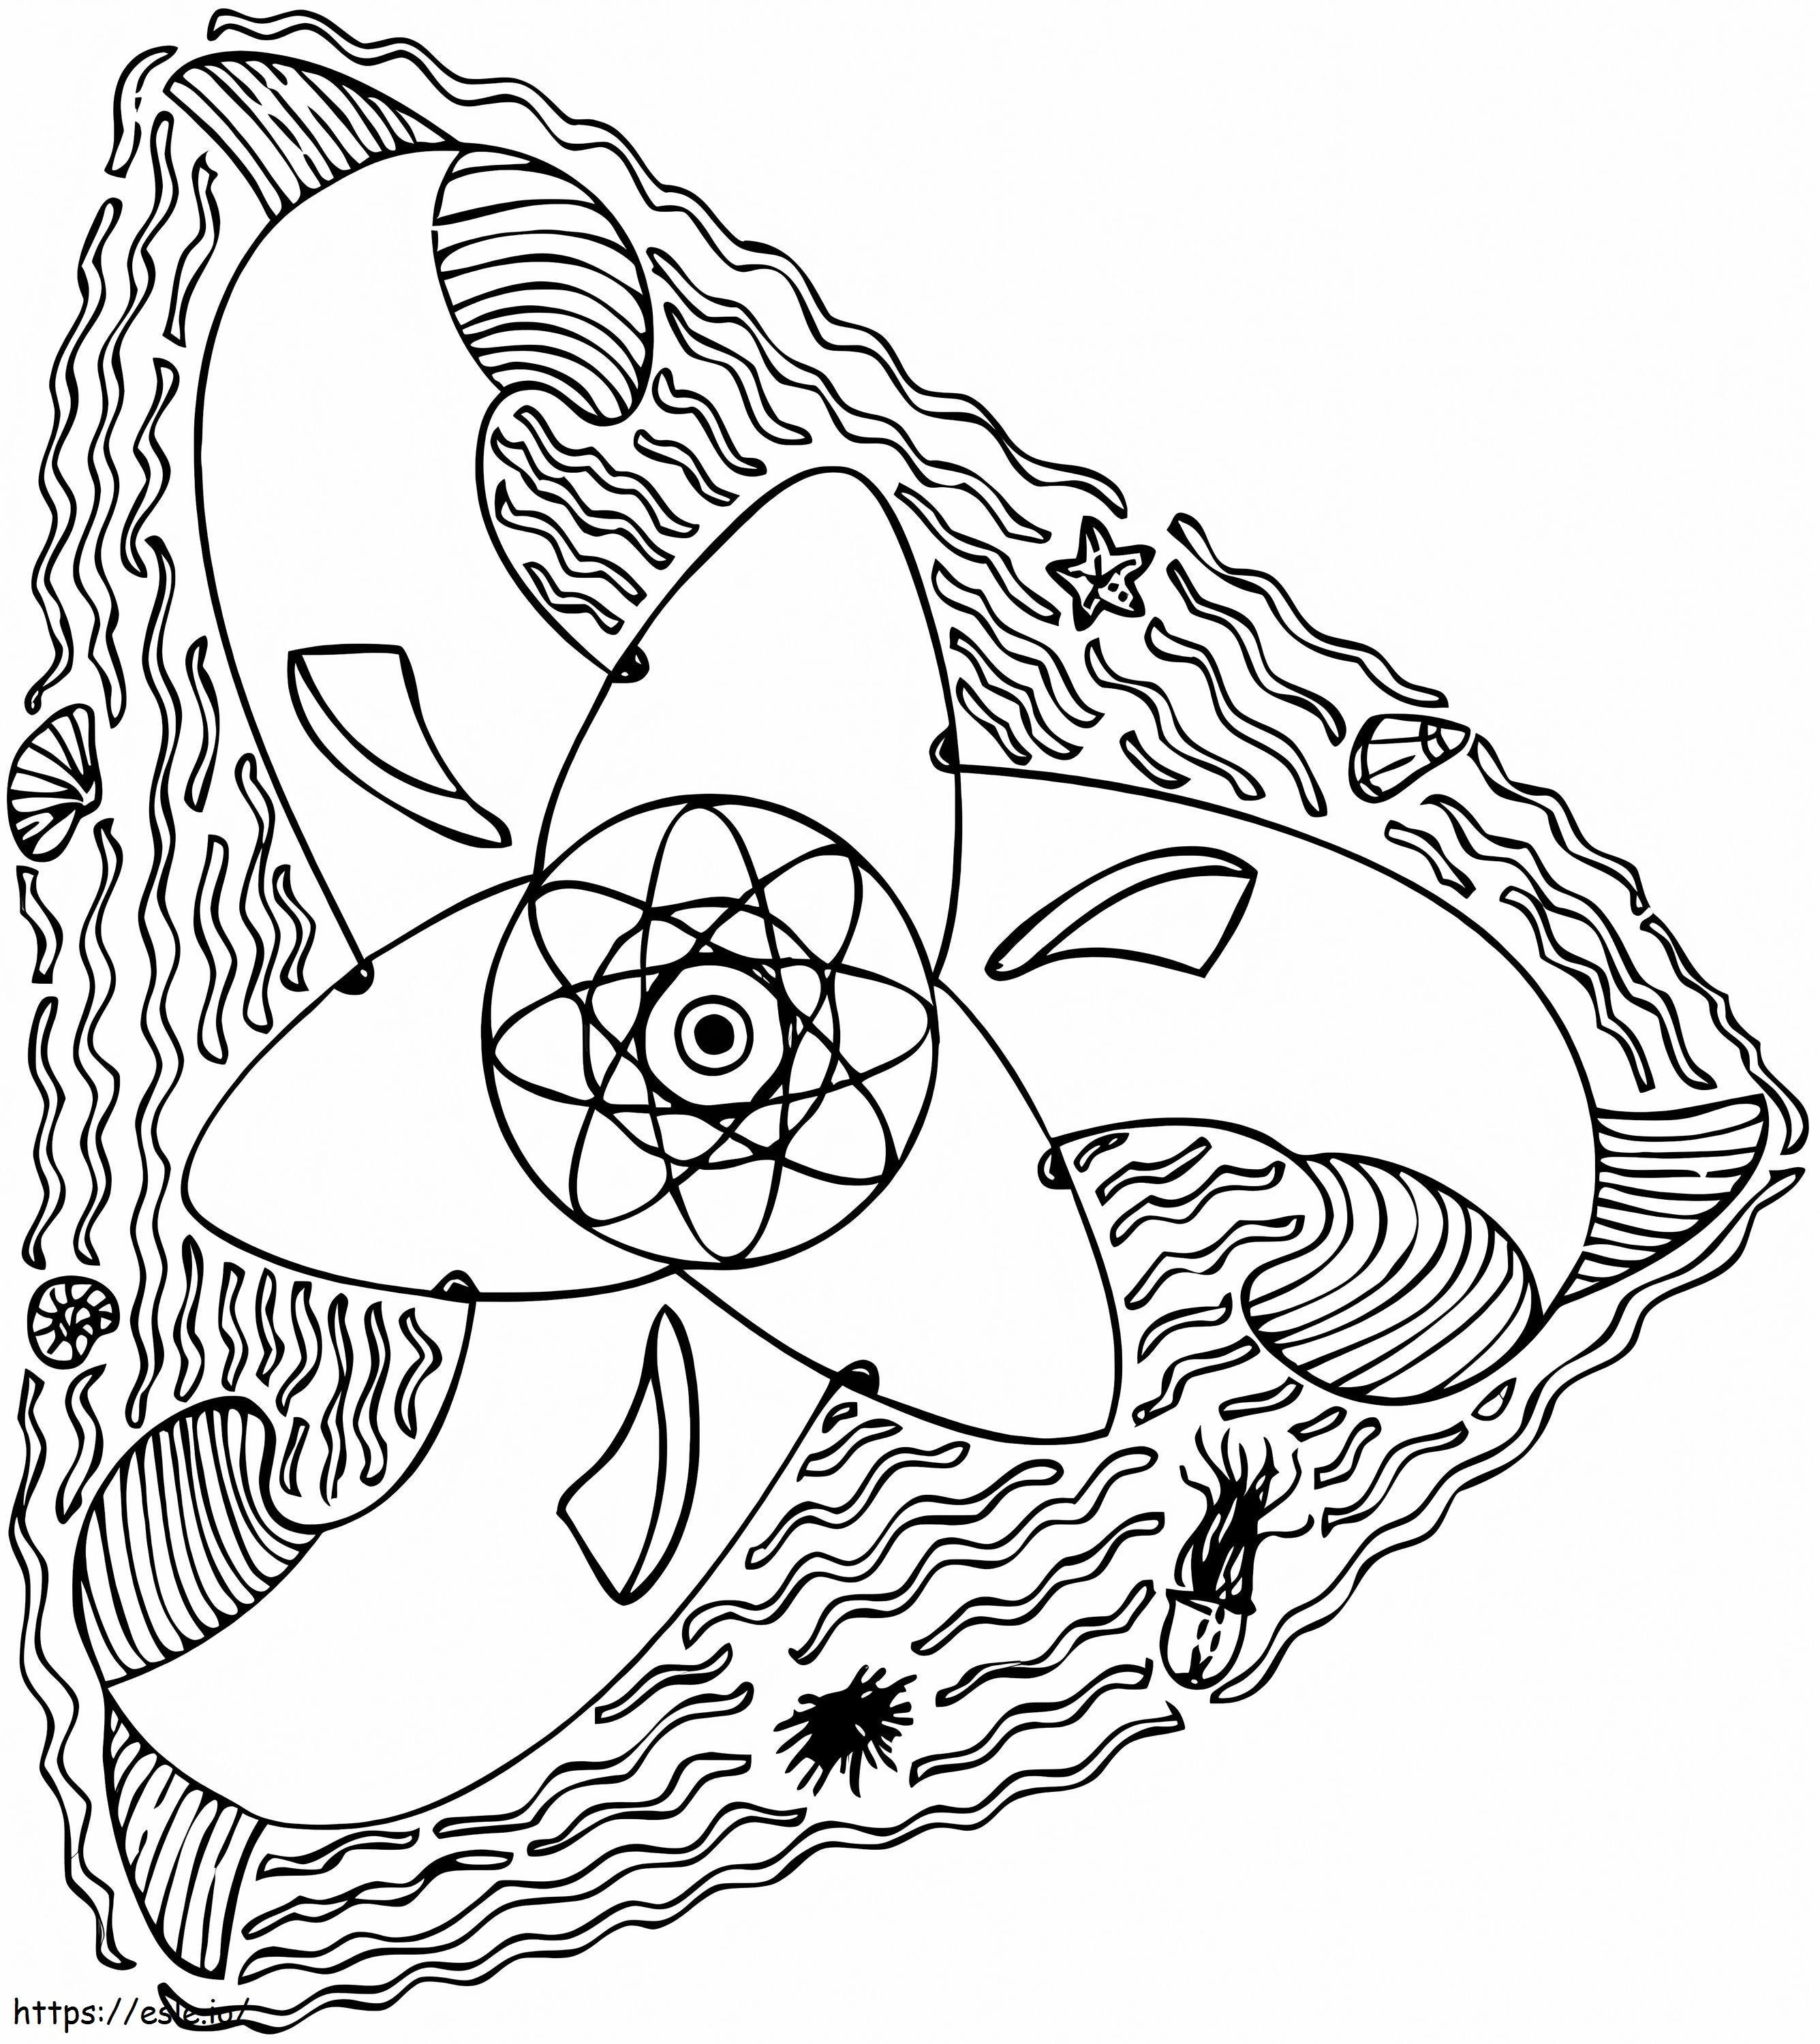 1562808748 Special Whale A4 coloring page